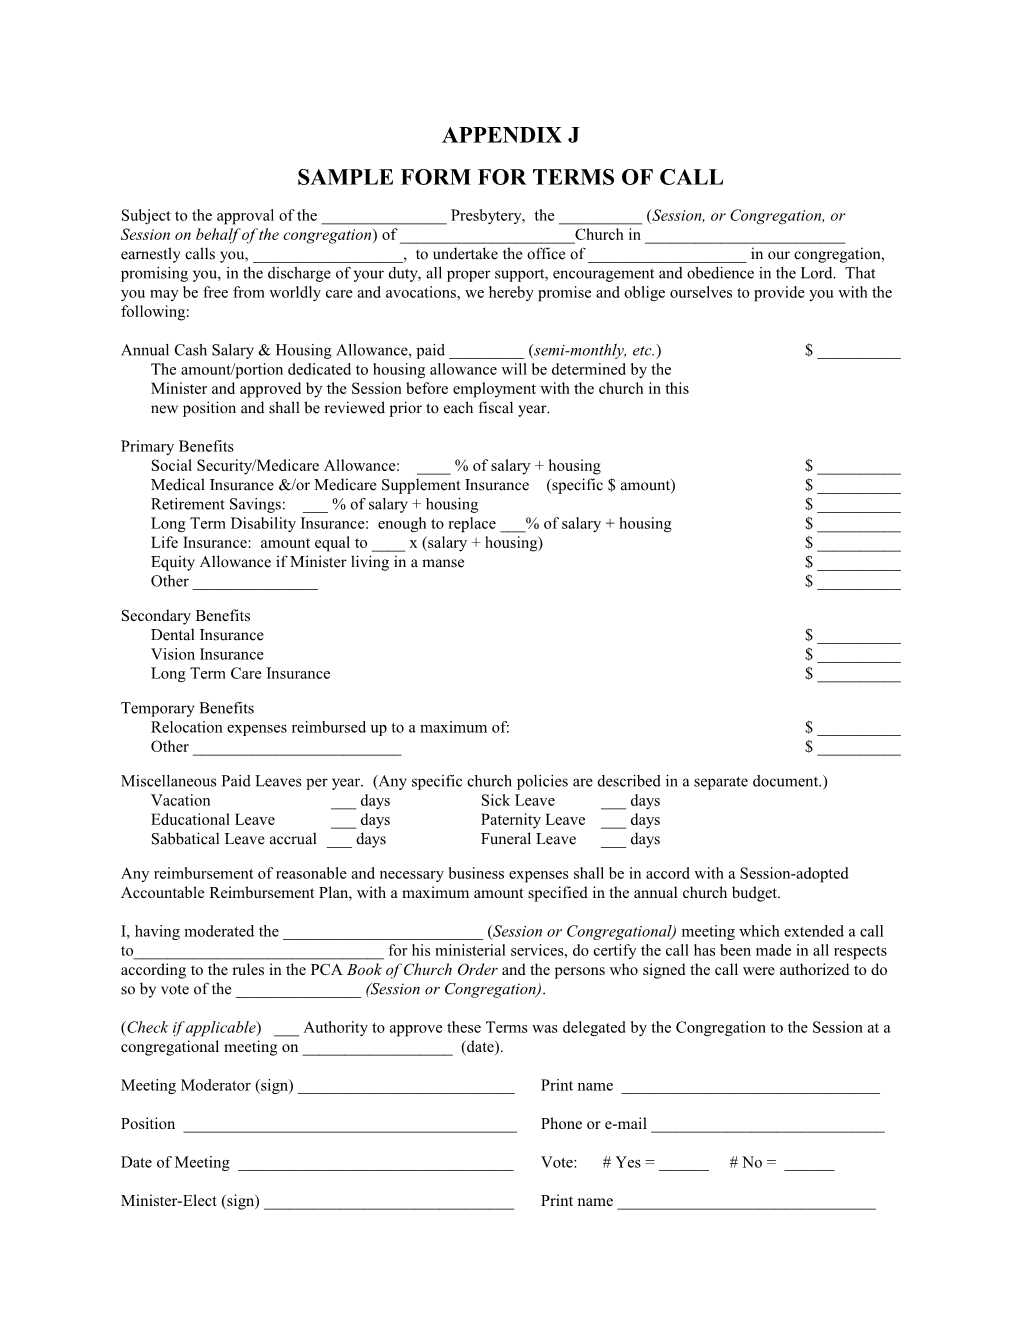 Sample Form for Terms of Call